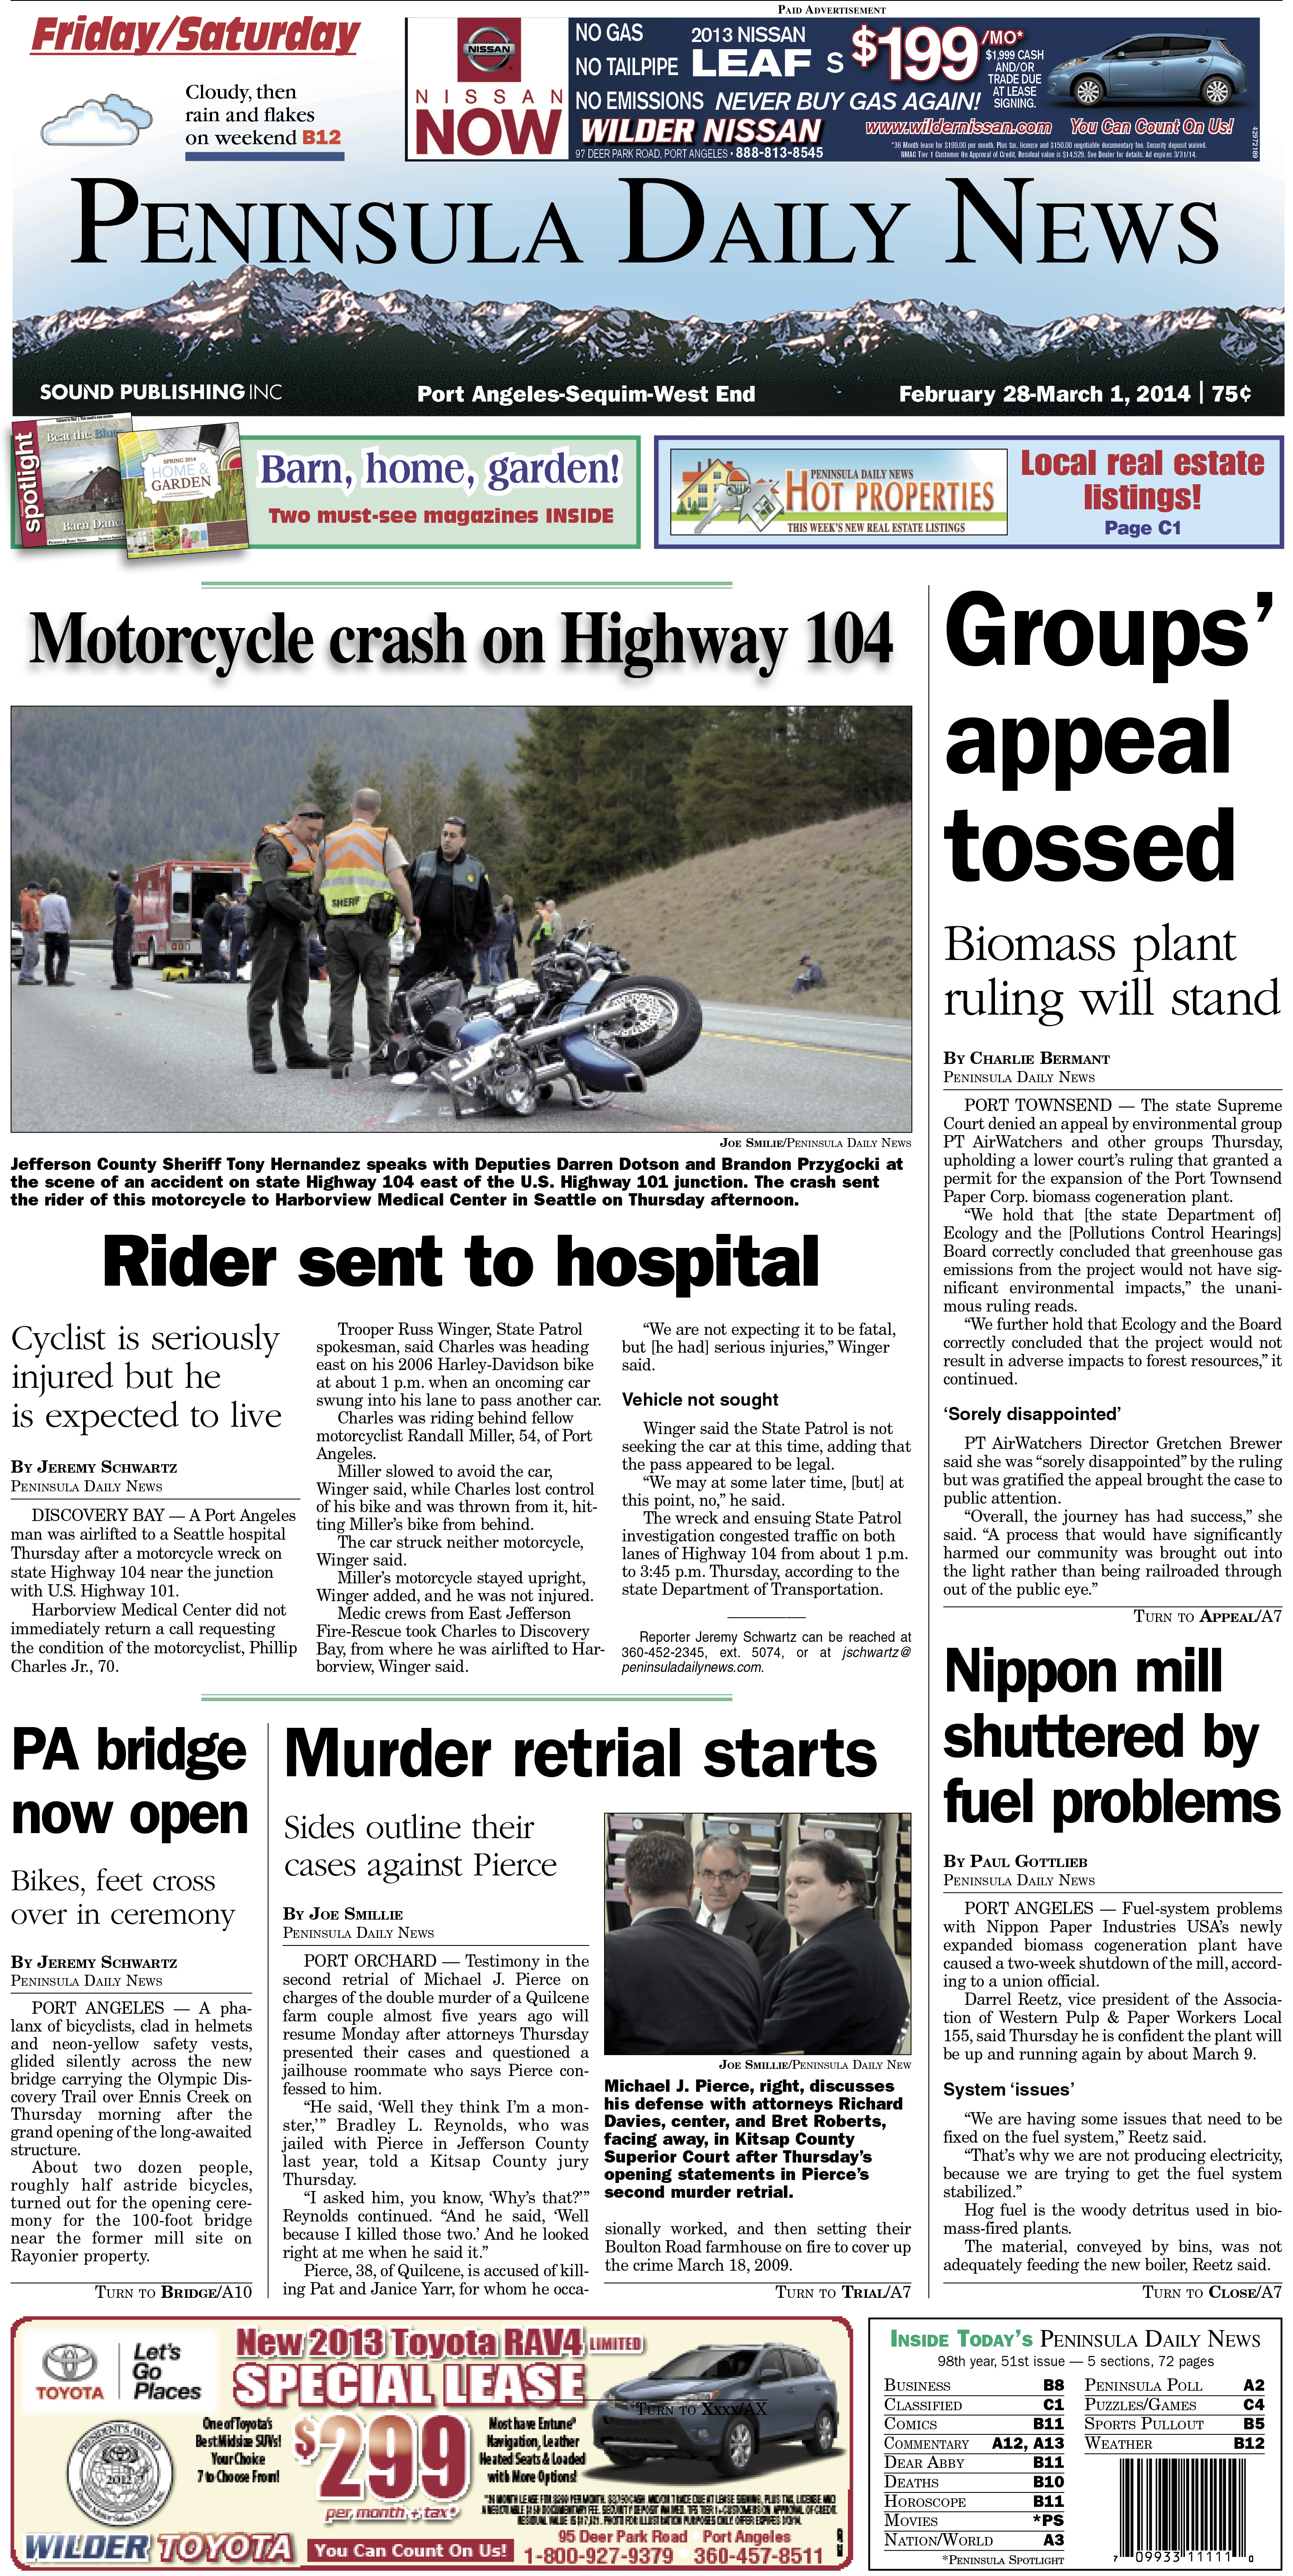 Today's front page for our Clallam County readers.